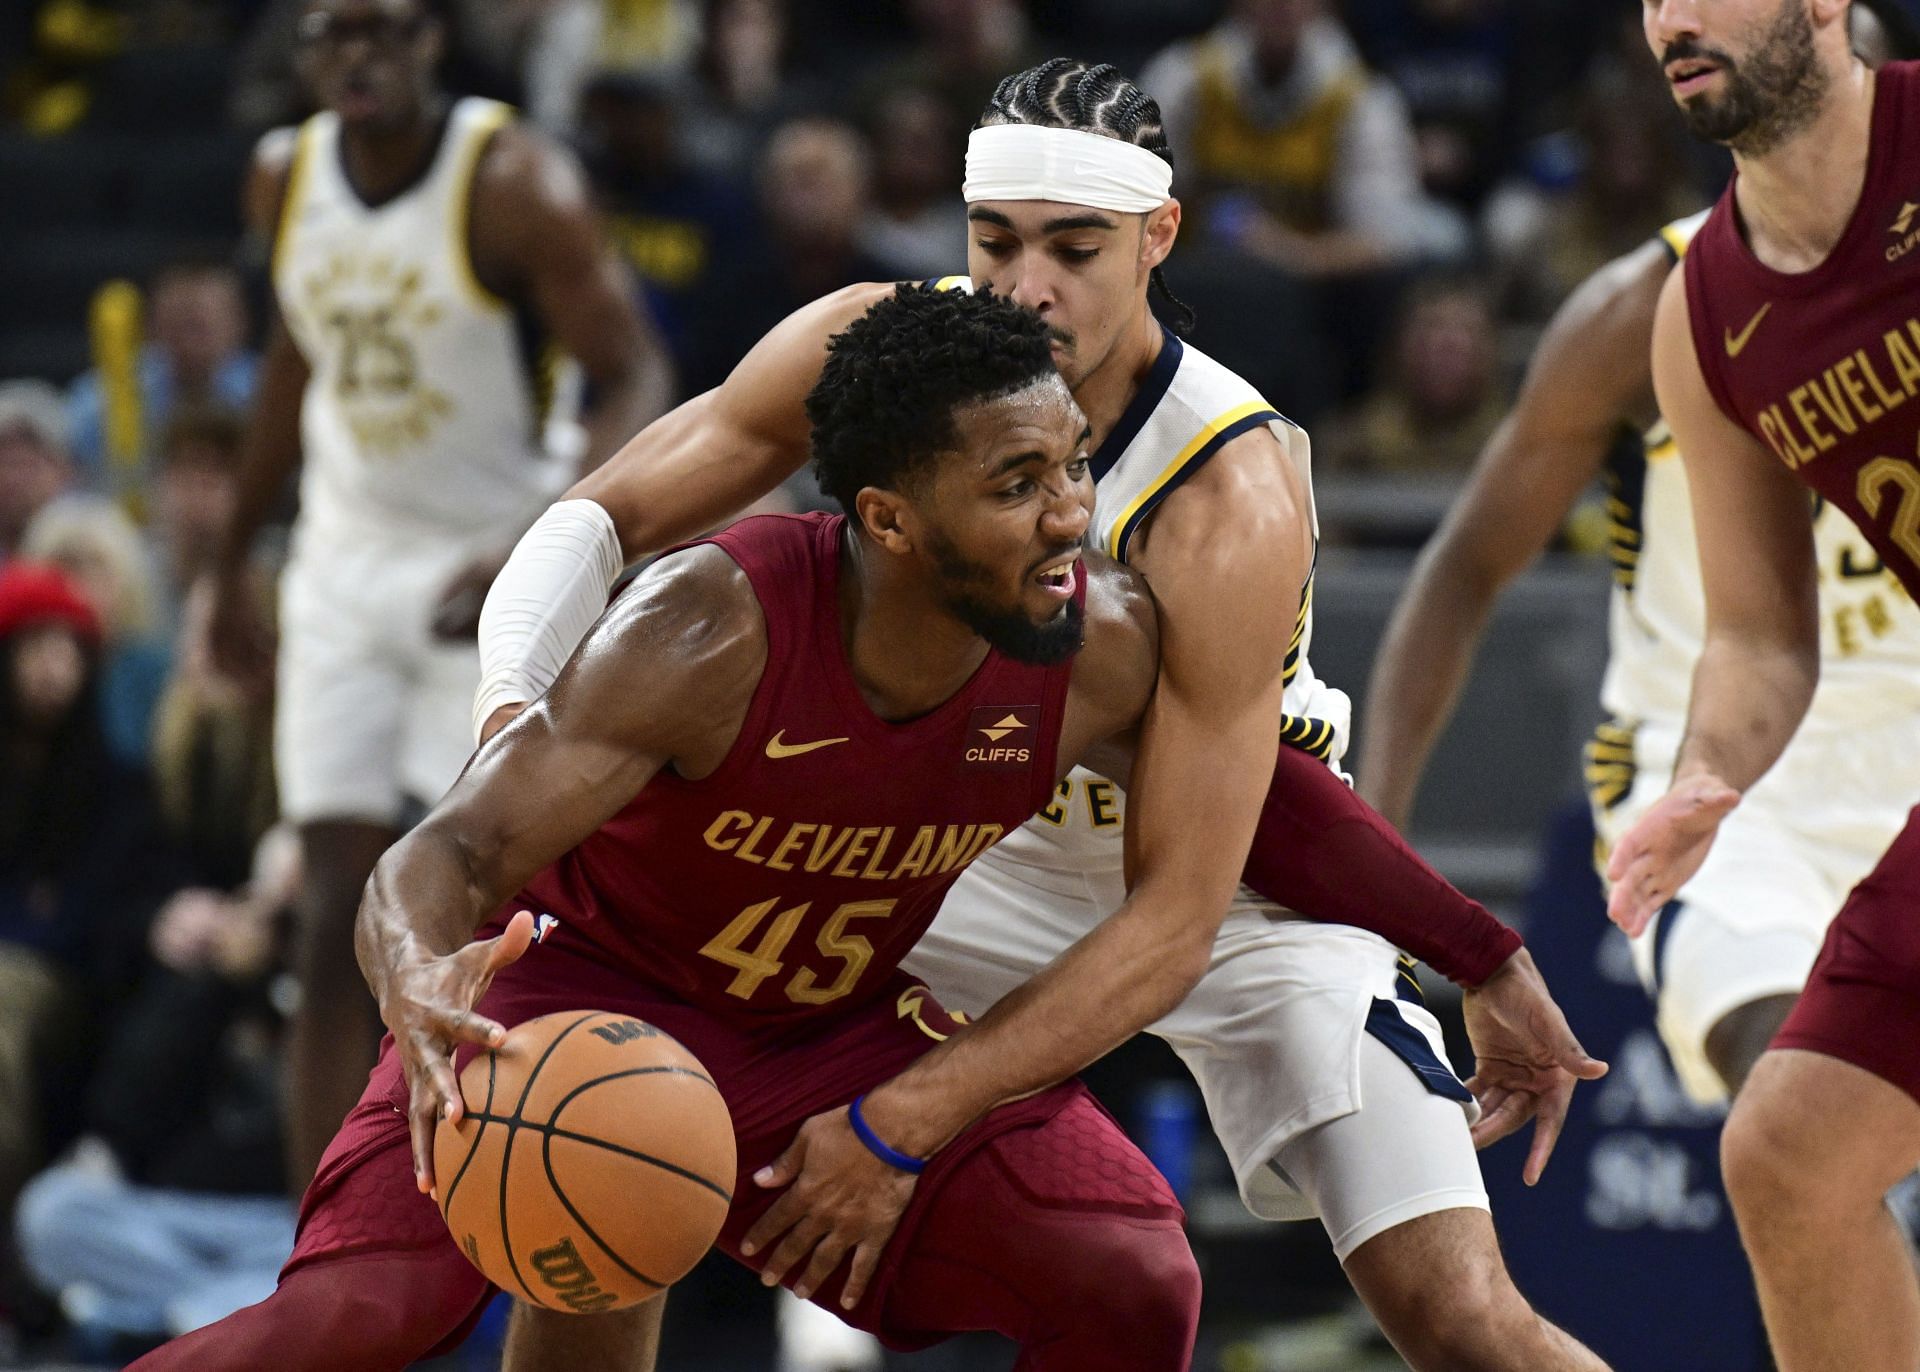 Donovan Mitchell of the Cleveland Cavaliers against the Indiana Pacers.